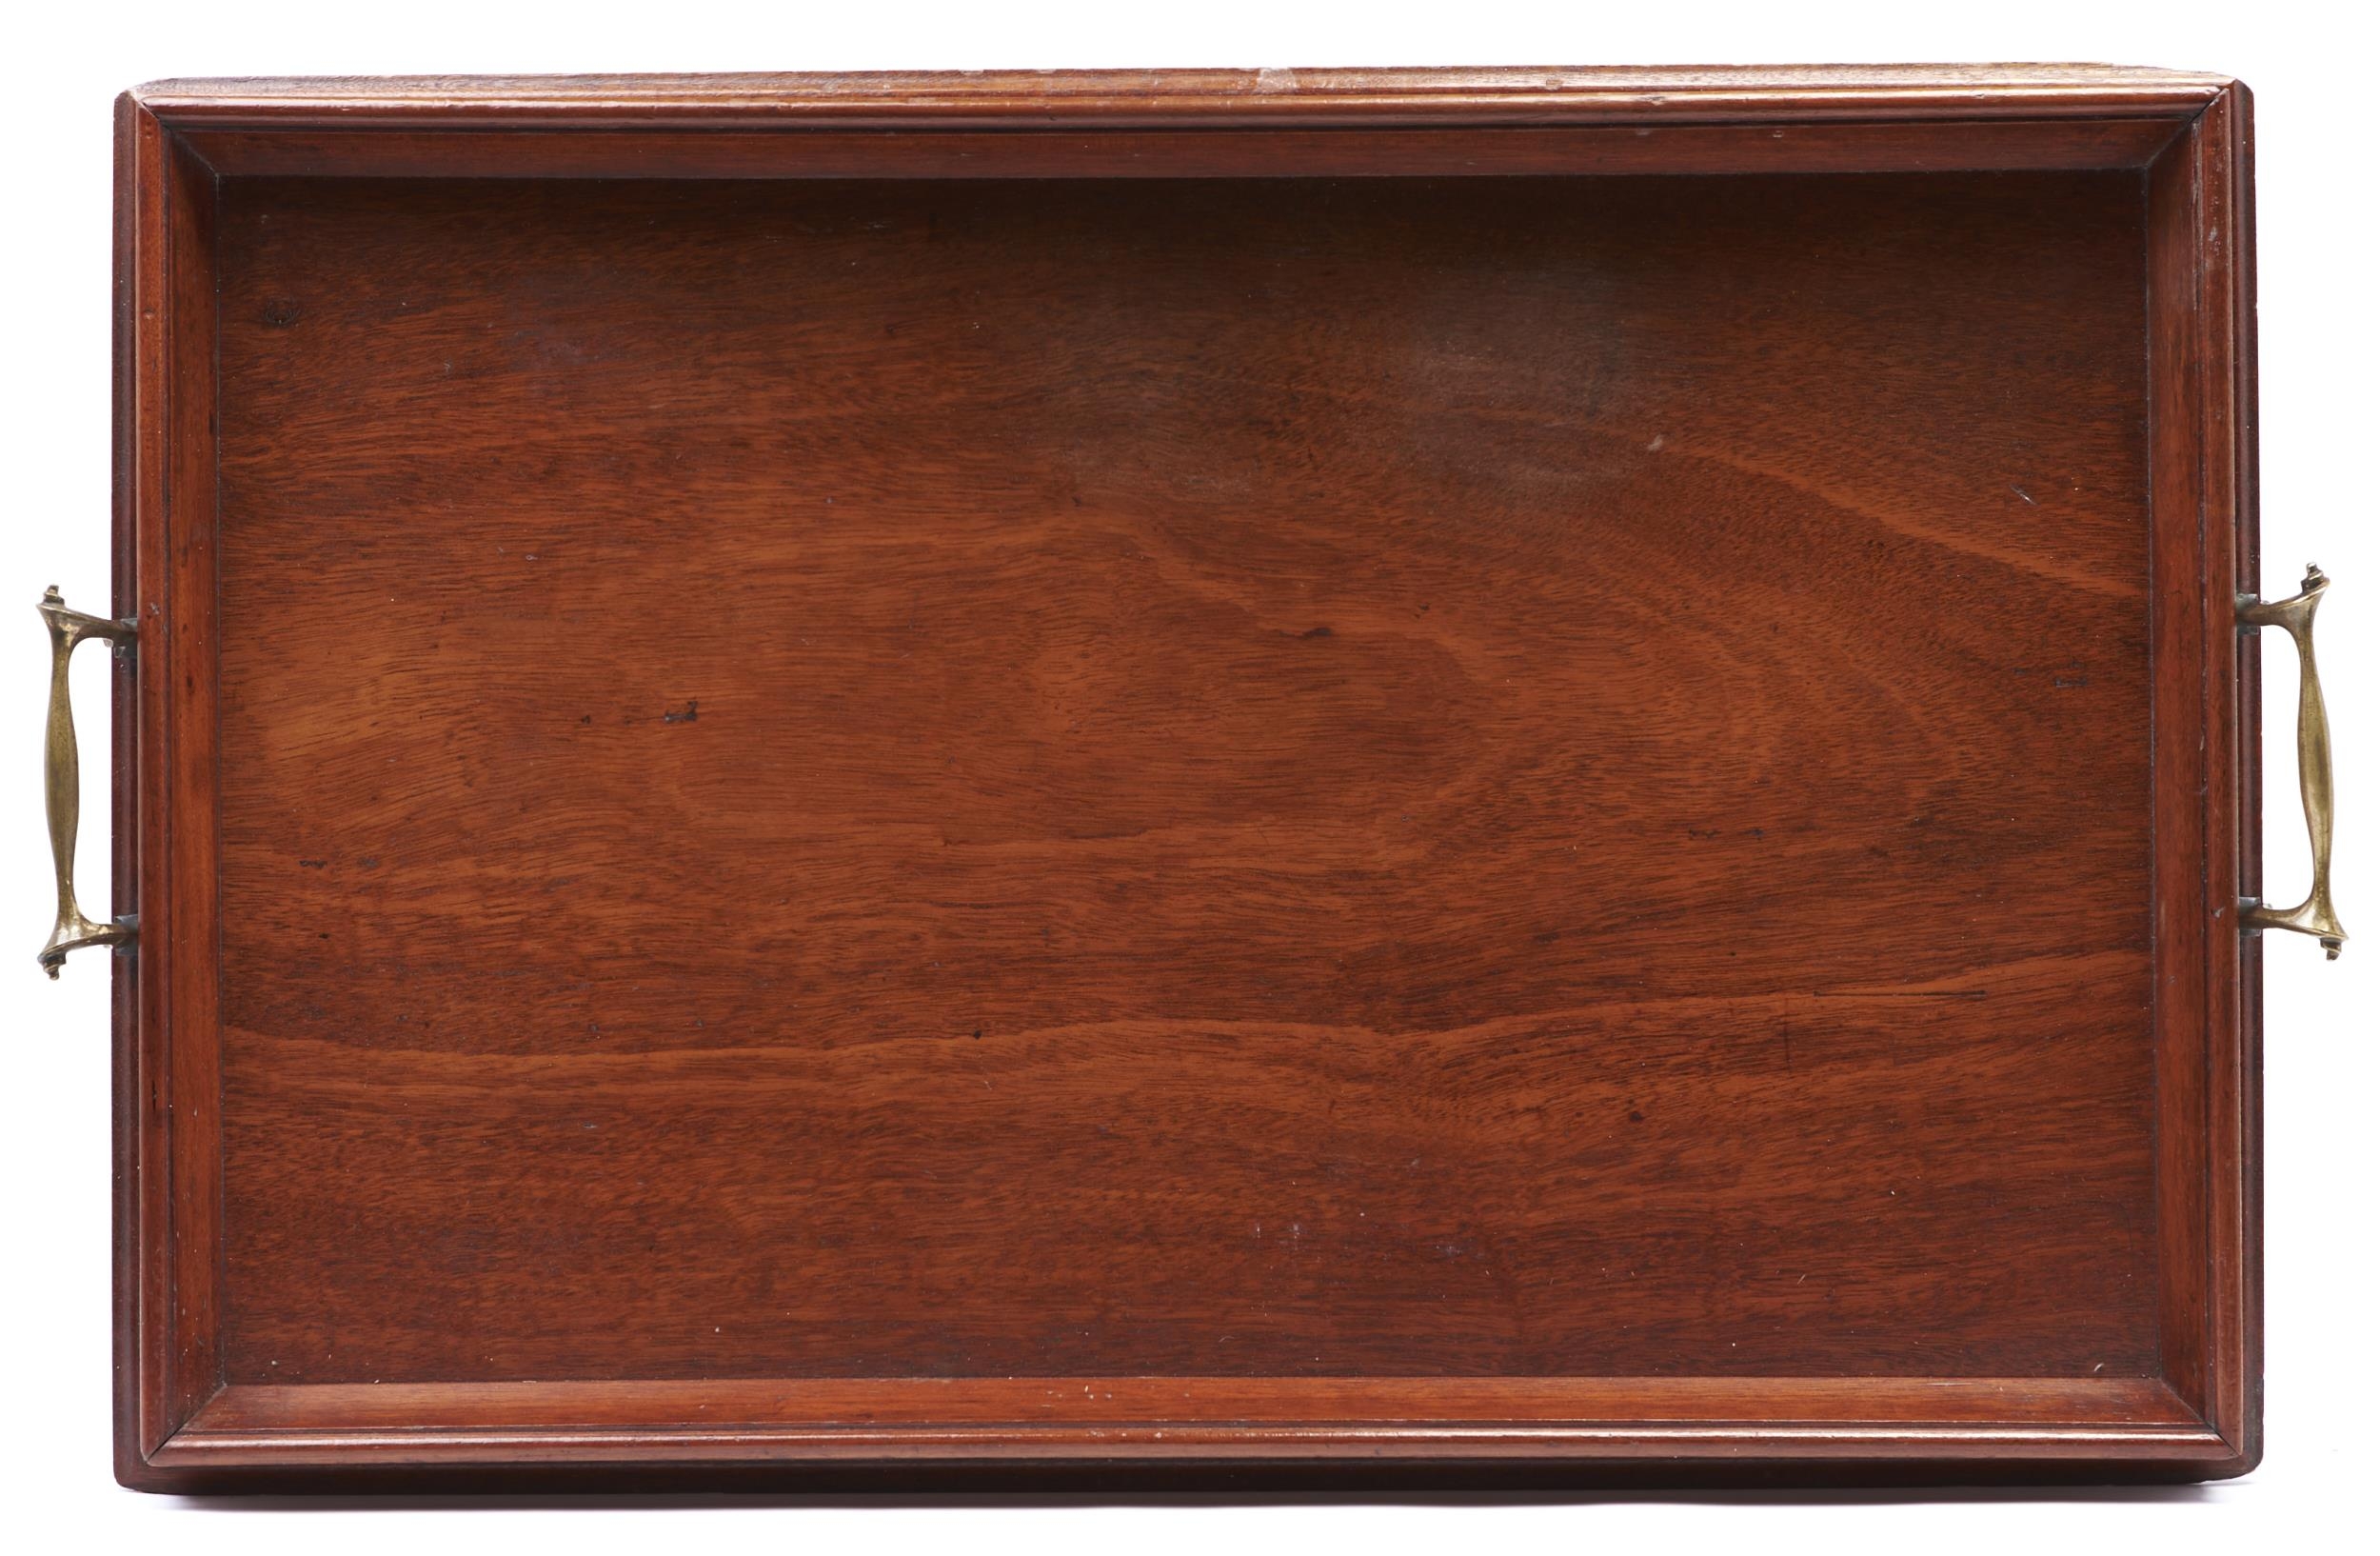 An Edwardian mahogany two handled tray, c1910, of rectangular outline with flared border and pair of